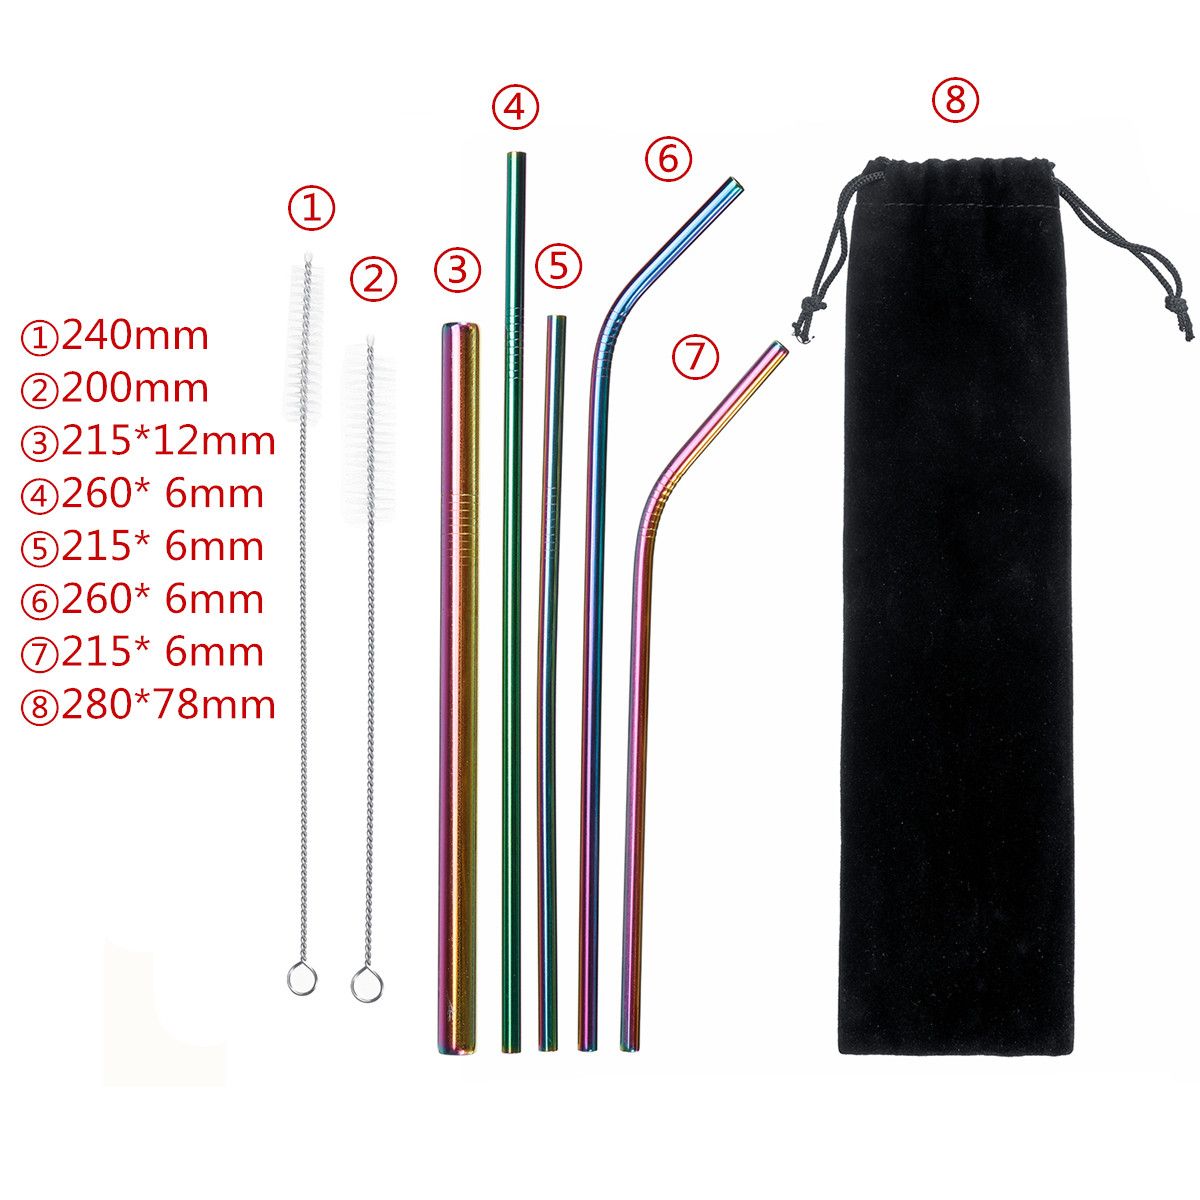 Portable-Metal-Straw-Set-304-Stainless-Steel-Straws-Reusable-Metal-Drinking-Straws-With-Cleaning-Bru-1532046